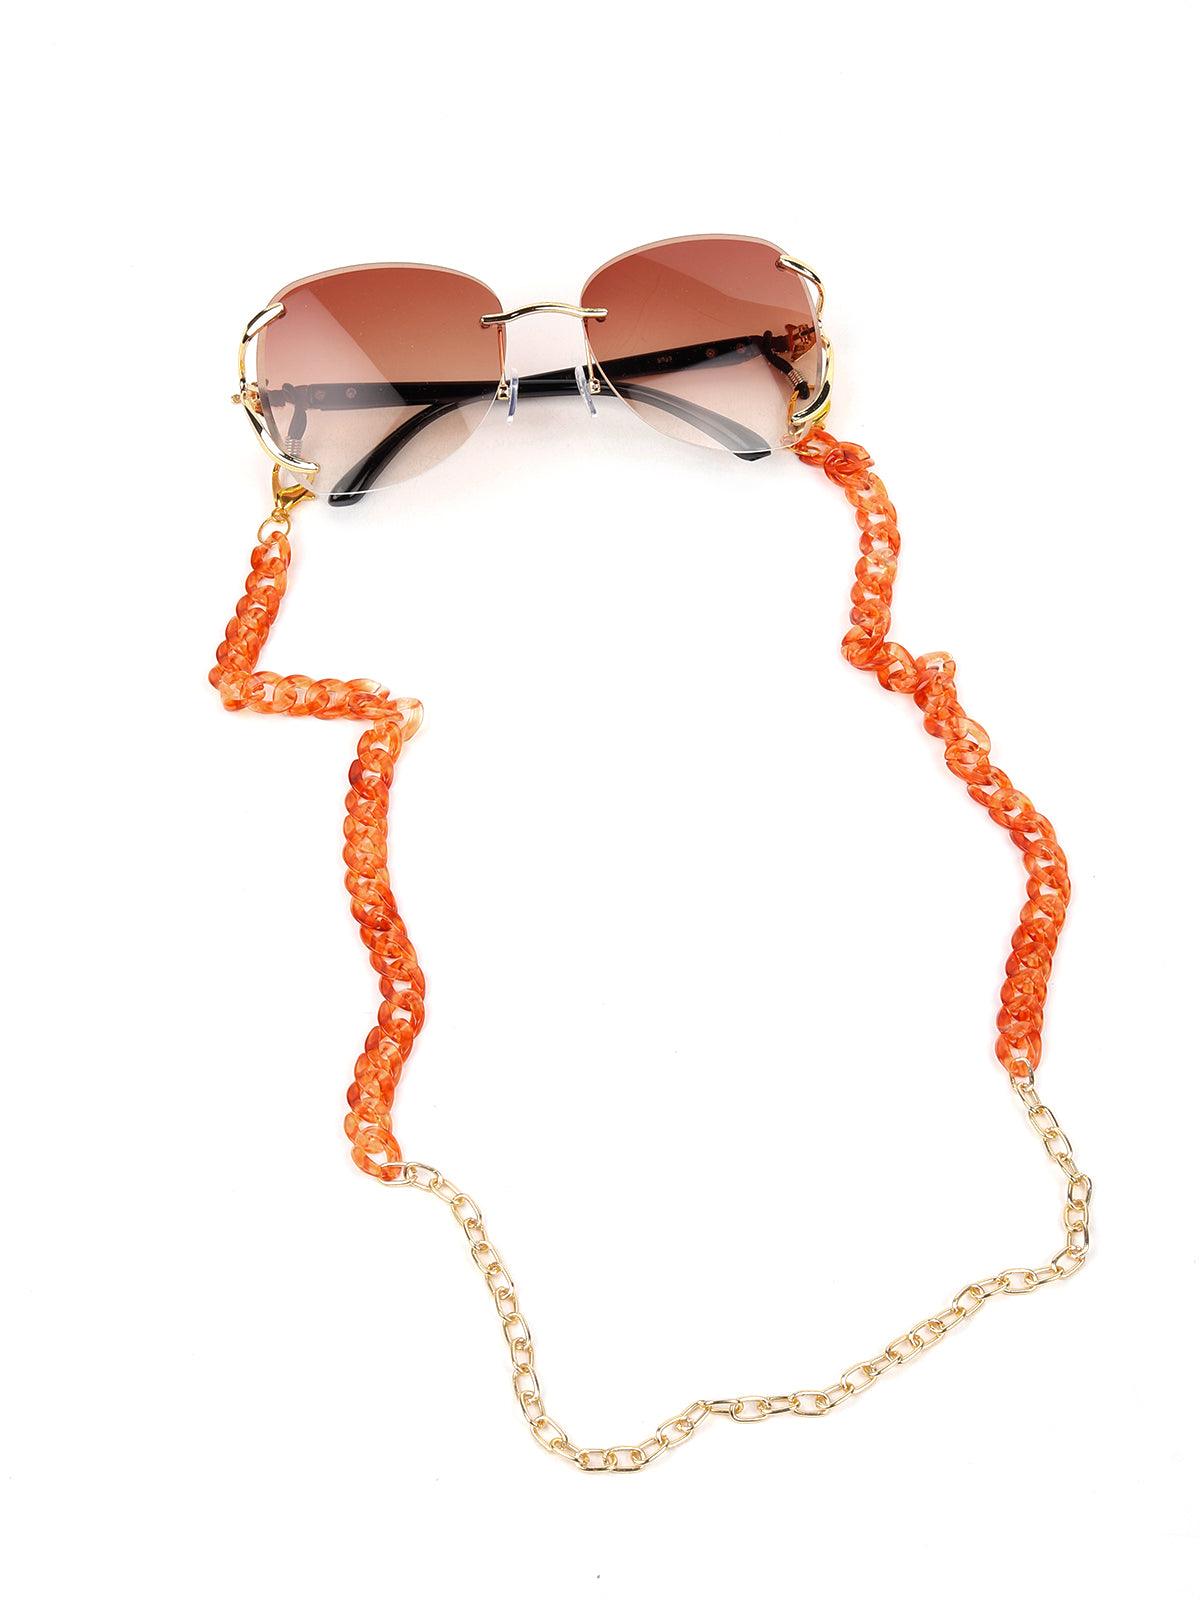 Stunning Brown And Gold Sunglass Chain - Odette